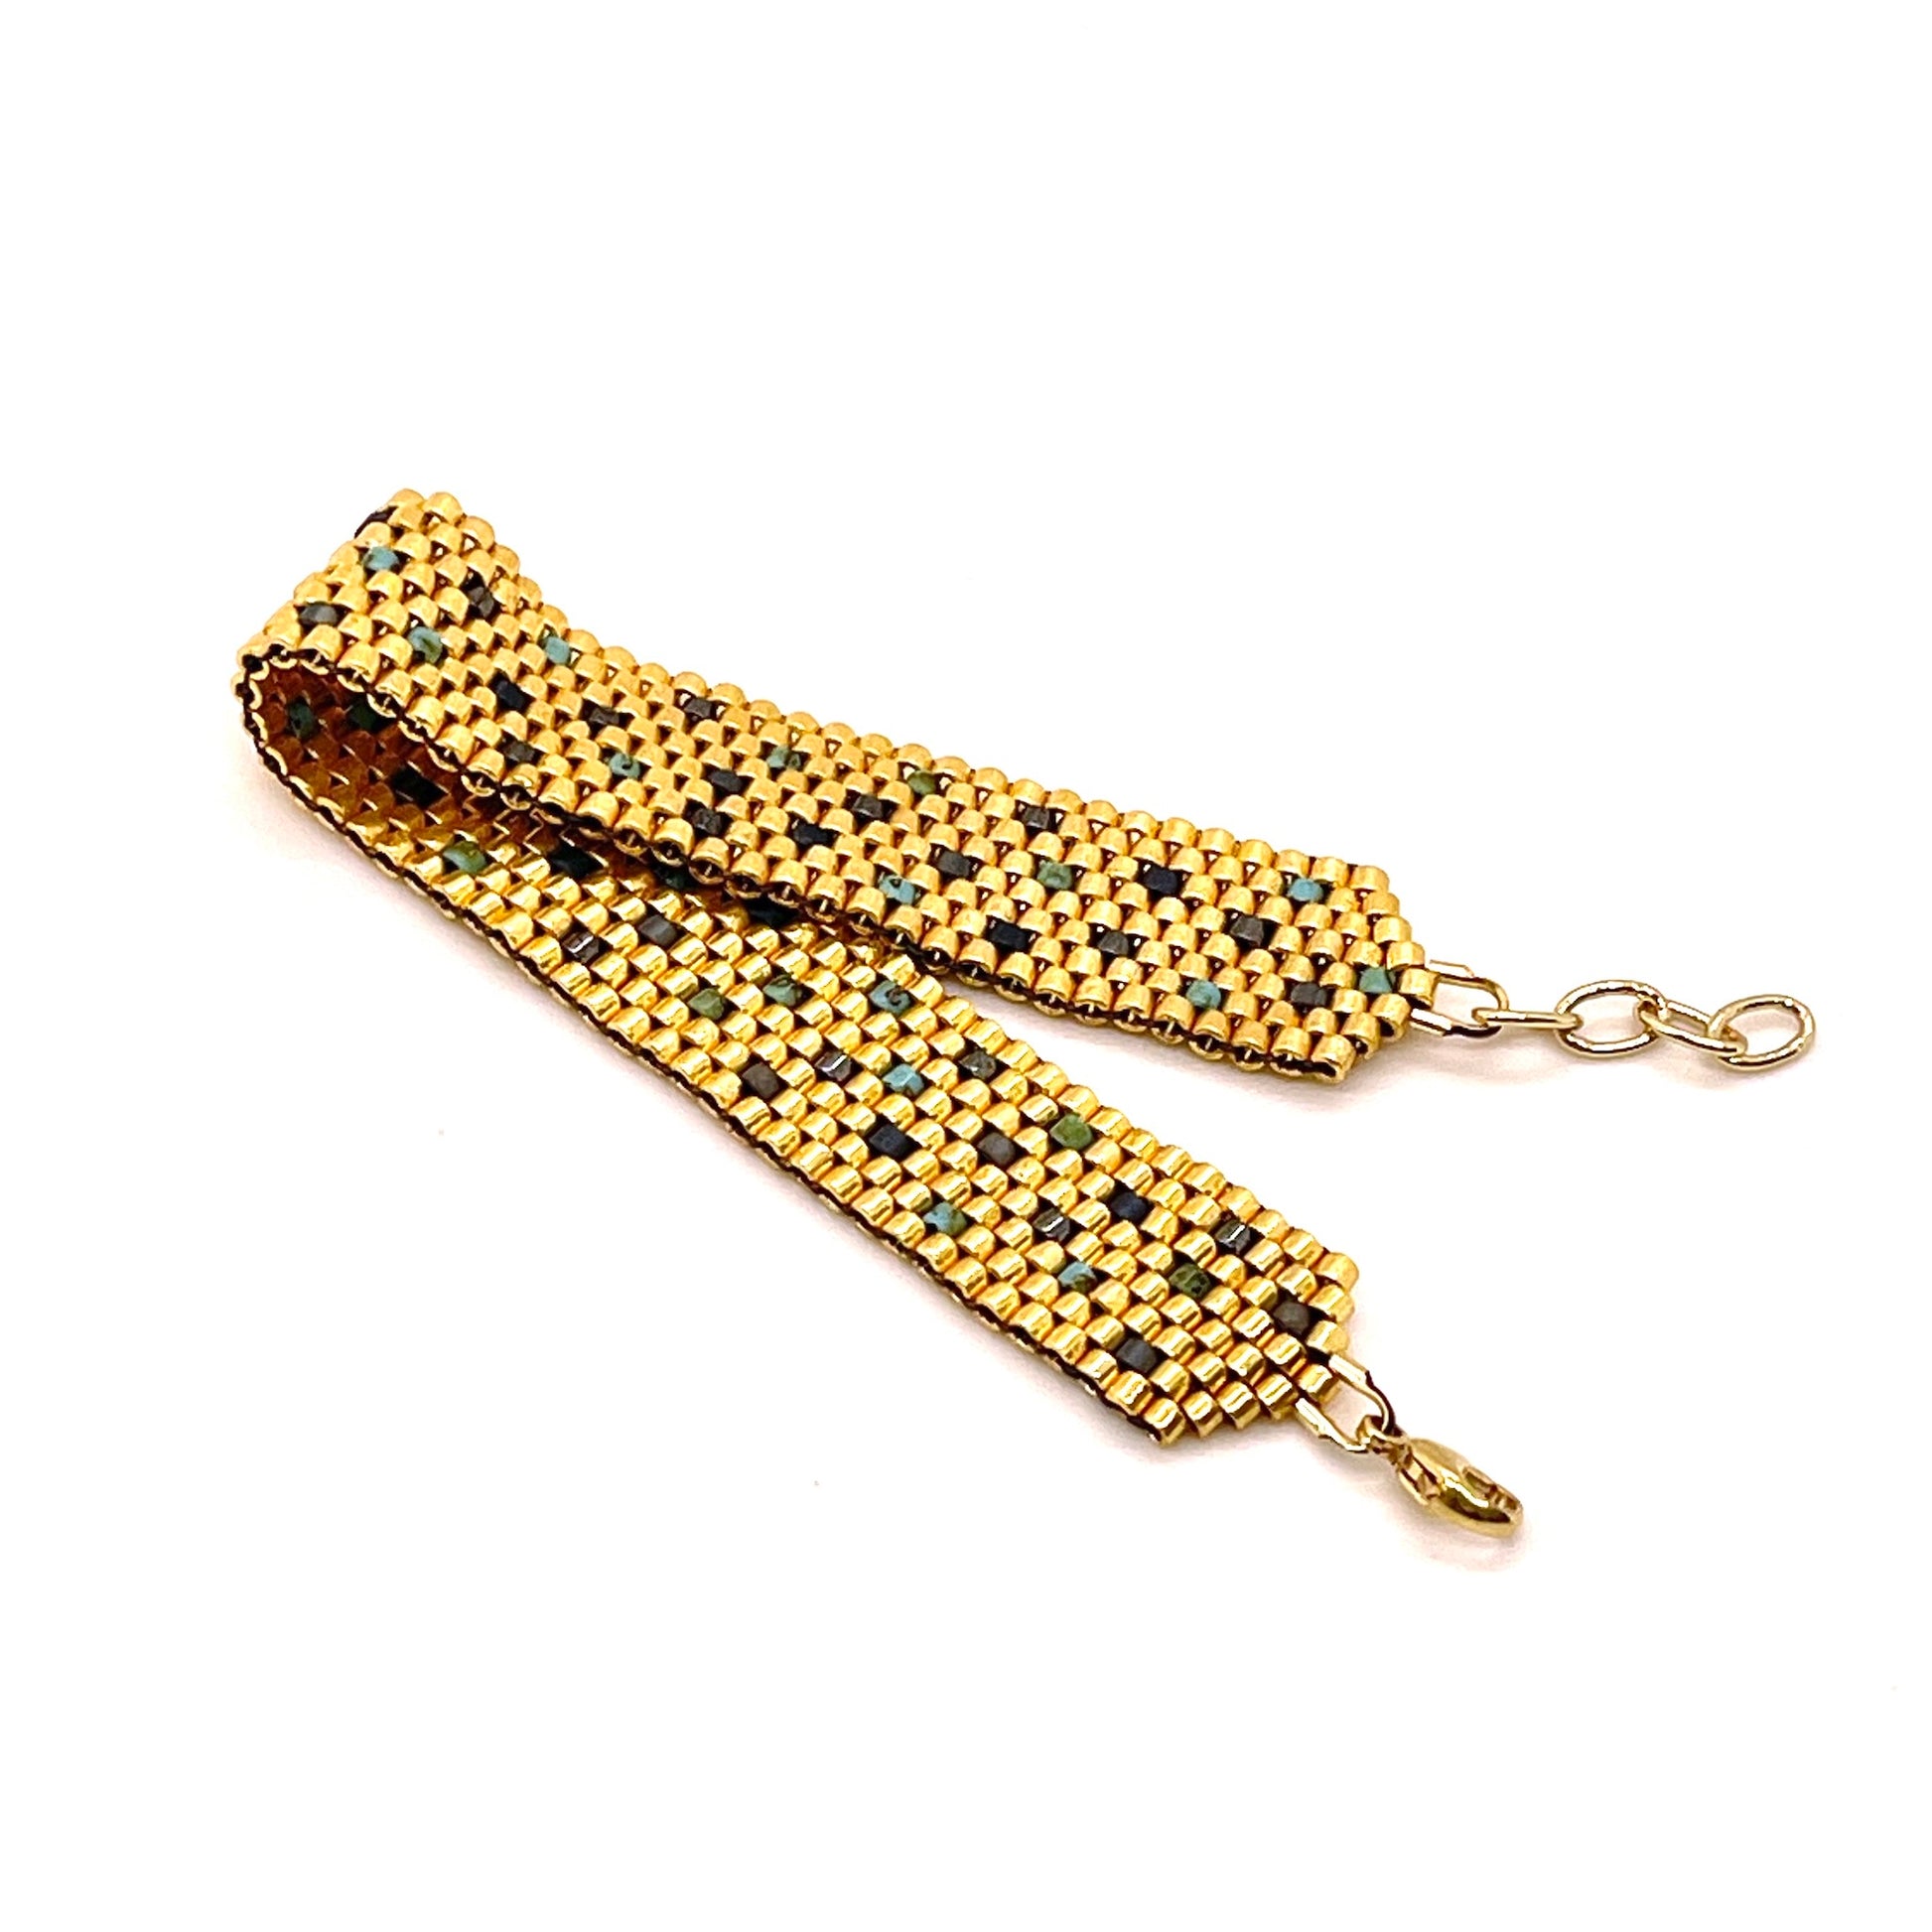 Gold seed bead handwoven bracelet with turquoise and gunmetal sprinkled accent beads.